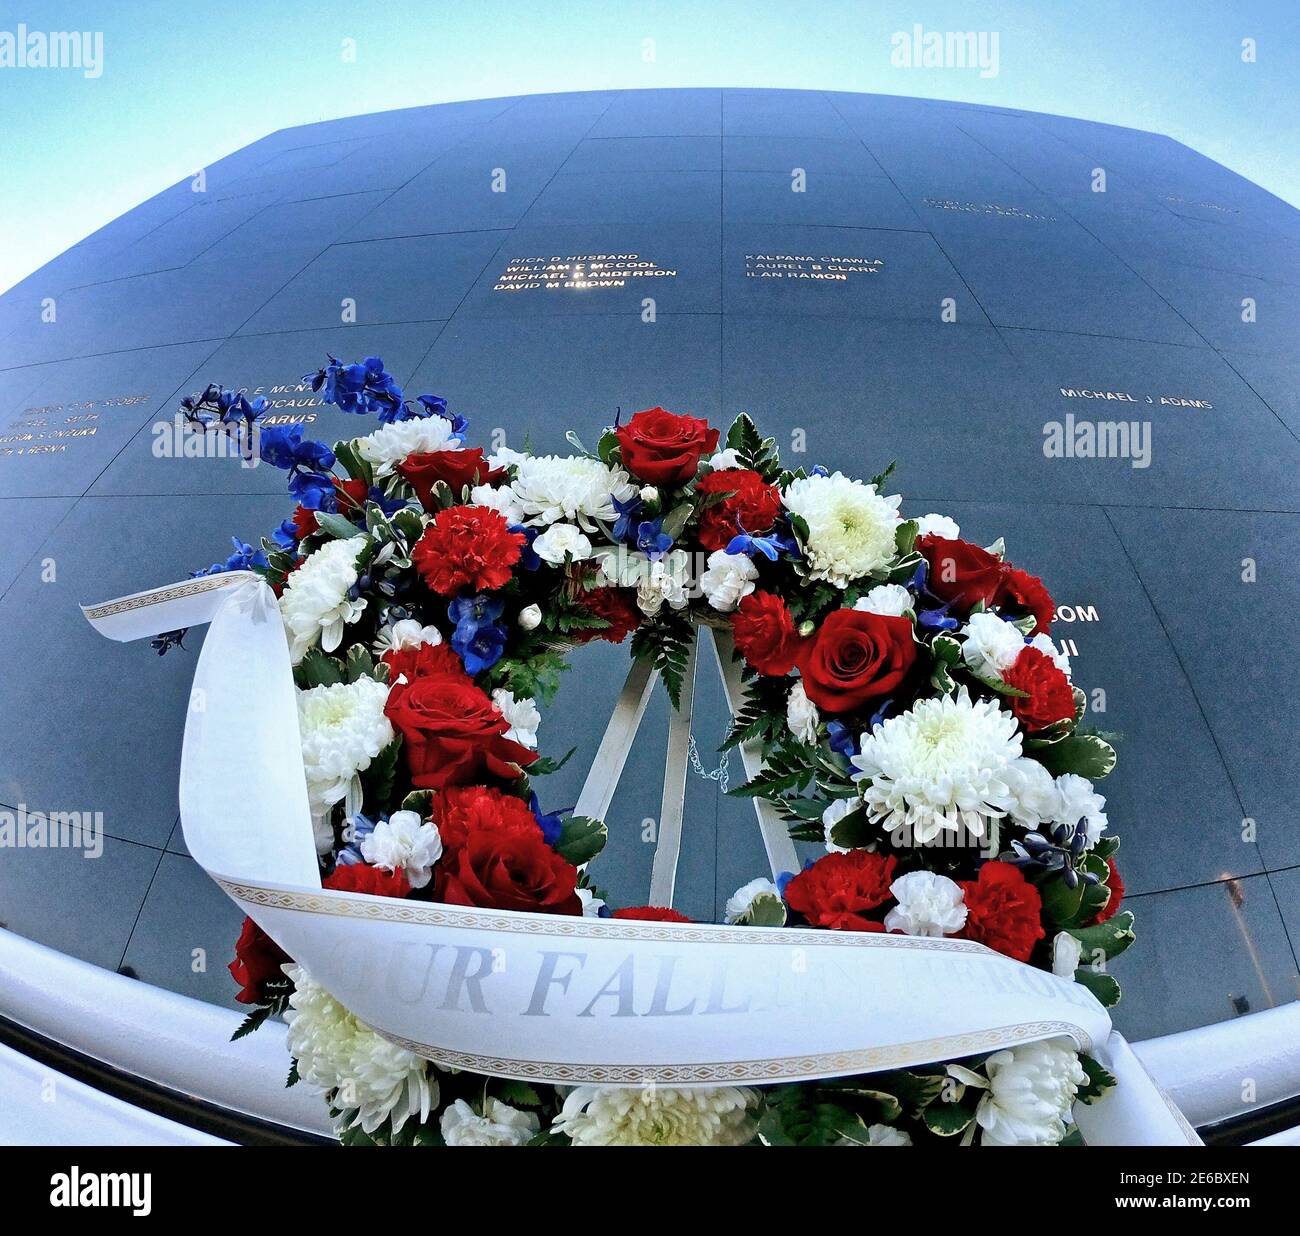 NO FILM, NO VIDEO, NO TV, NO DOCUMENTARY - The wreath laid at the base of the Space Mirror Memorial during a 35th anniversary commemoration ceremony honoring the seven astronauts killed in the 1986 Challenger shuttle disaster, at Kennedy Space Center, Florida on Thursday, January 28, 2021. Photo by Joe Burbank/Orlando Sentinel/TNS/ABACAPRESS.COM Stock Photo